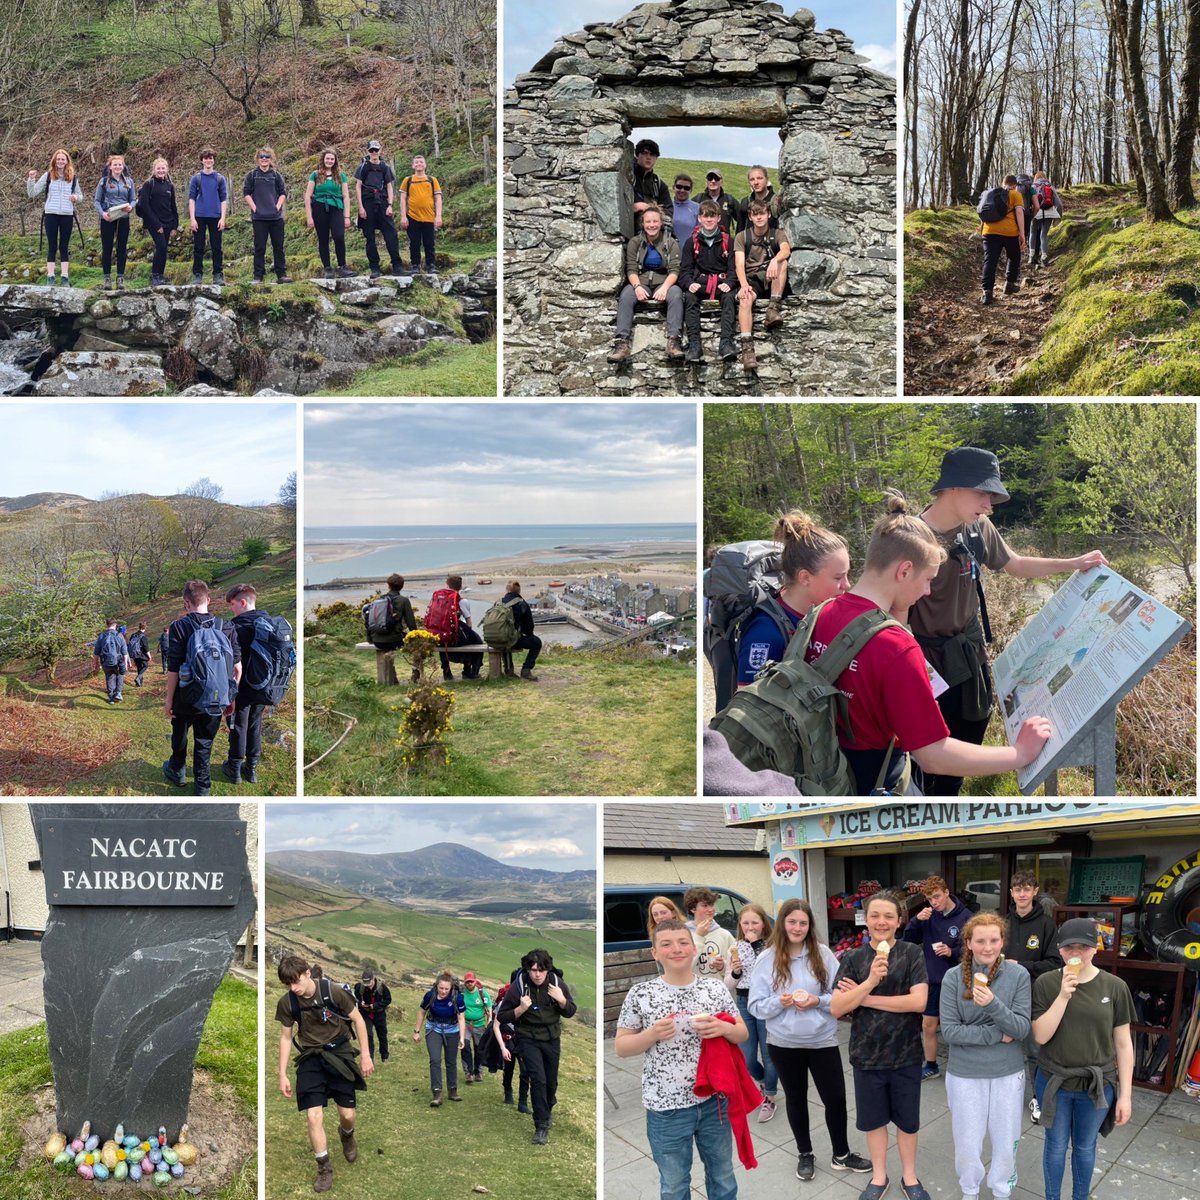 Excellent day on the hills yesterday exploring and taking in the gorgeous views! 🥾🧭🗺 
Followed by a much deserved ice cream 🍦☀️ with our Fairbourne Challenge into the evening which included an Easter Egg Hunt 🐣 #actionpackedday 💤 
@aircadets @MerseysideWing @306RAFAirCadets